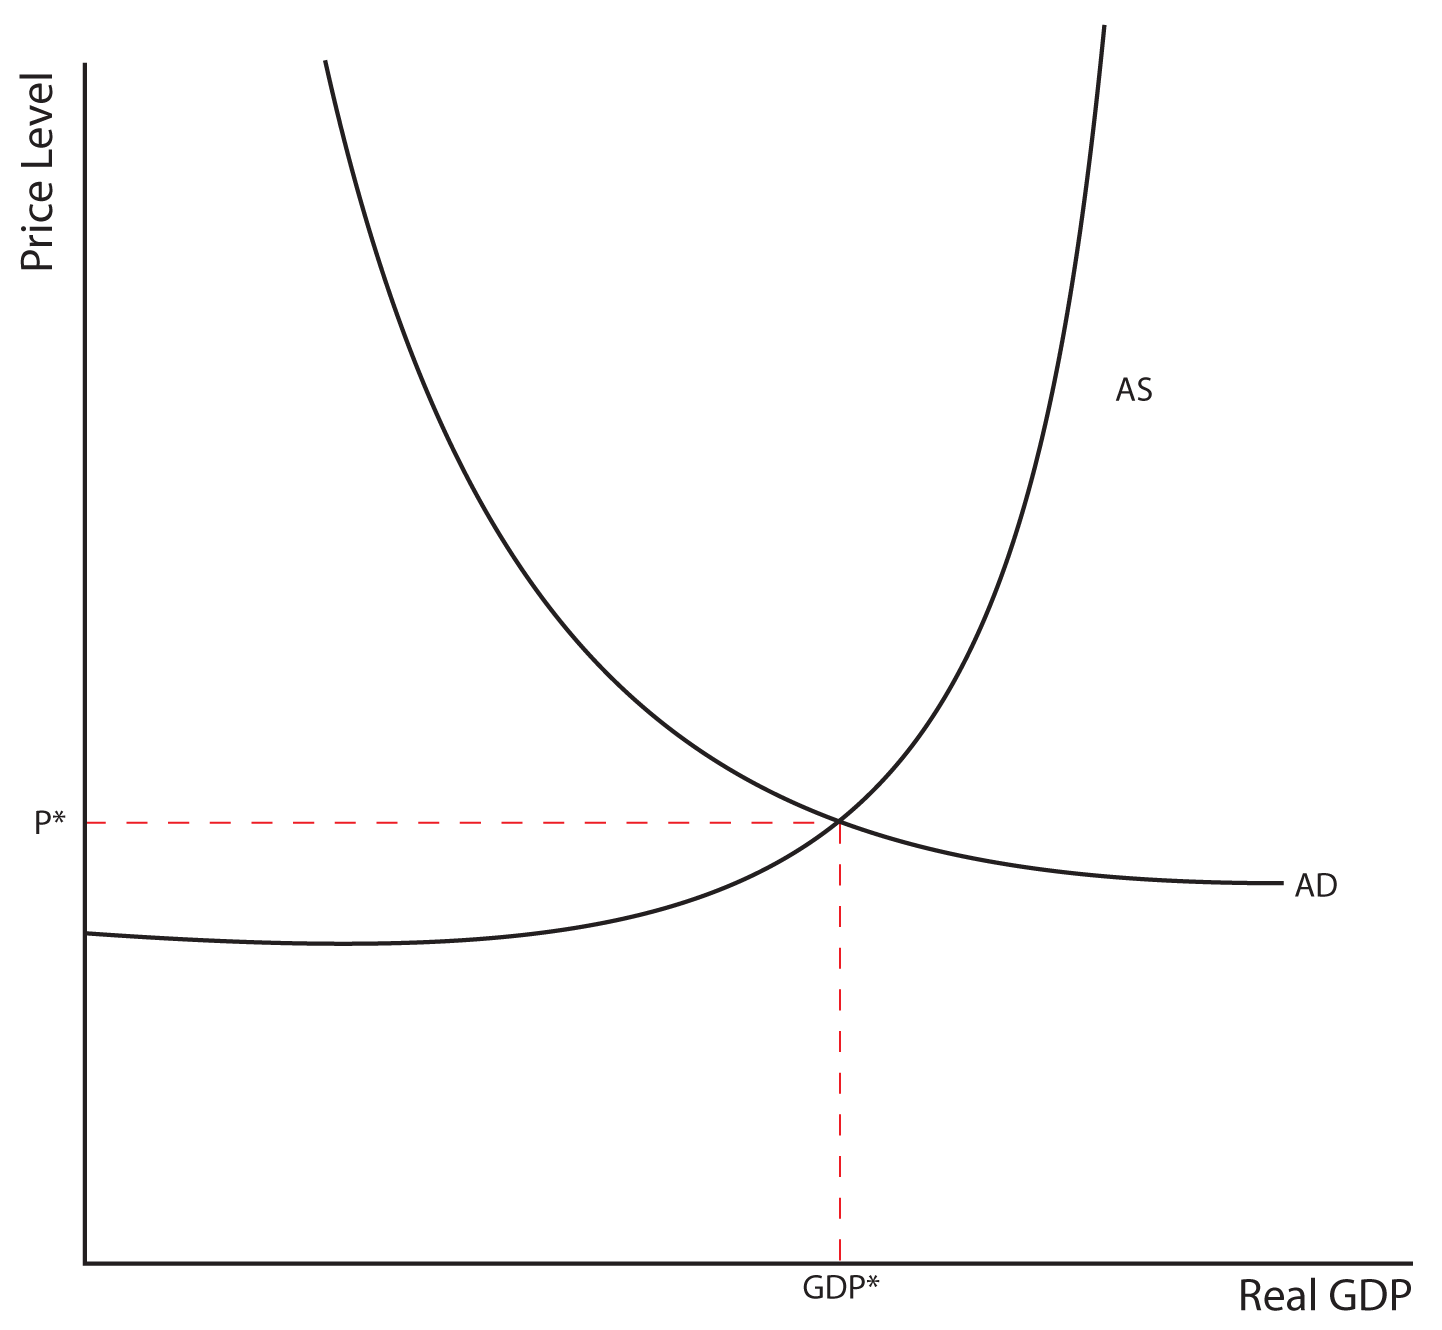 Image 8.05: The image shows a graph. The y axis is labeled Price Level. The x axis is labeled Real GDP. There are two curved lines. The first is has a positive curve and is labeled AS, the second has a negative curve and is labeled AD. They intersect at point P on the y axis and GDP on the x axis.